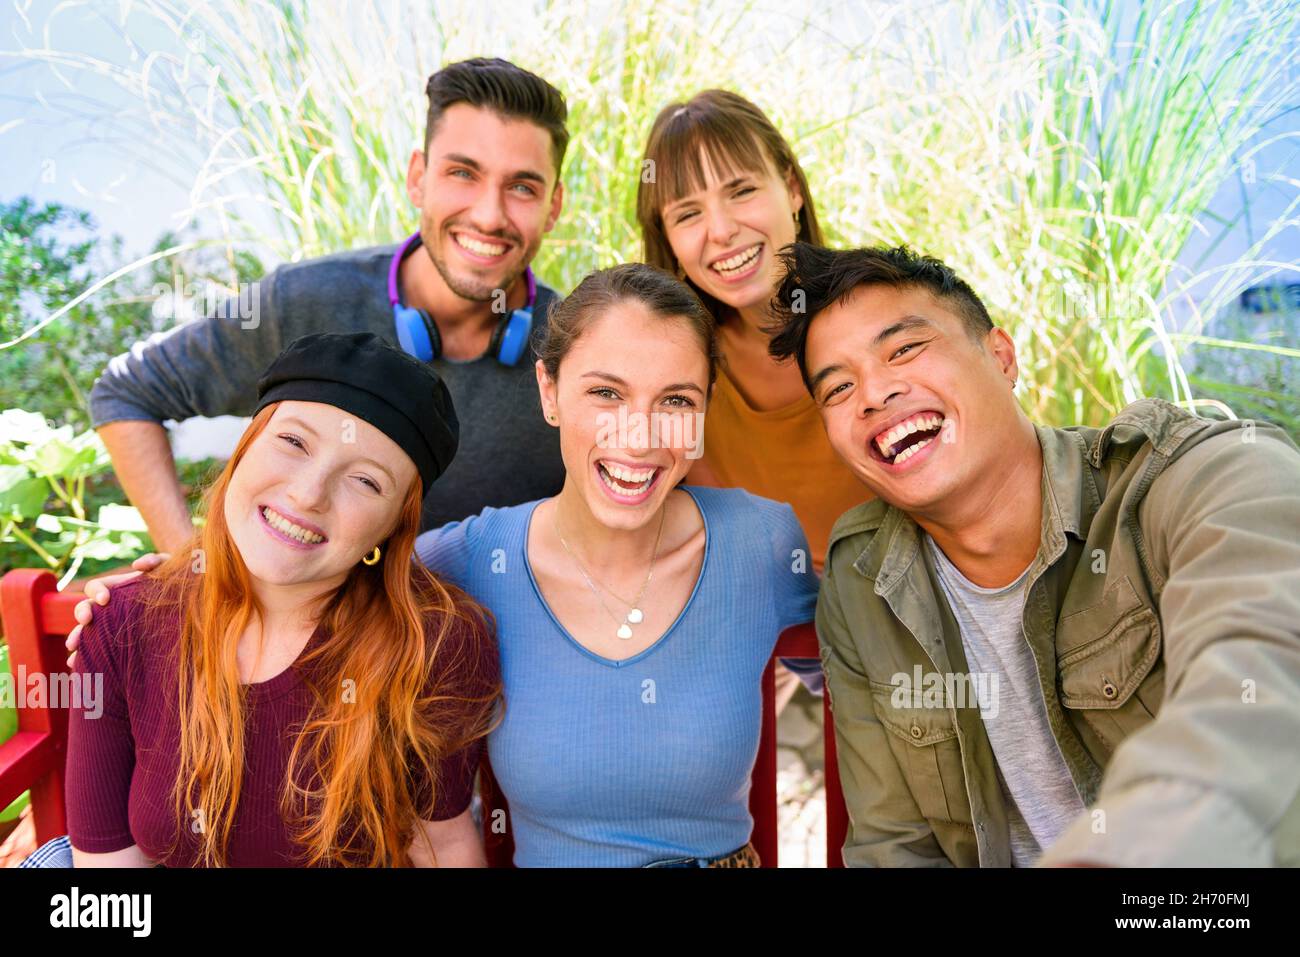 Group of cheerful multiethnic male and female friends in casual clothes smiling and looking at camera while taking selfie in green garden on sunny day Stock Photo